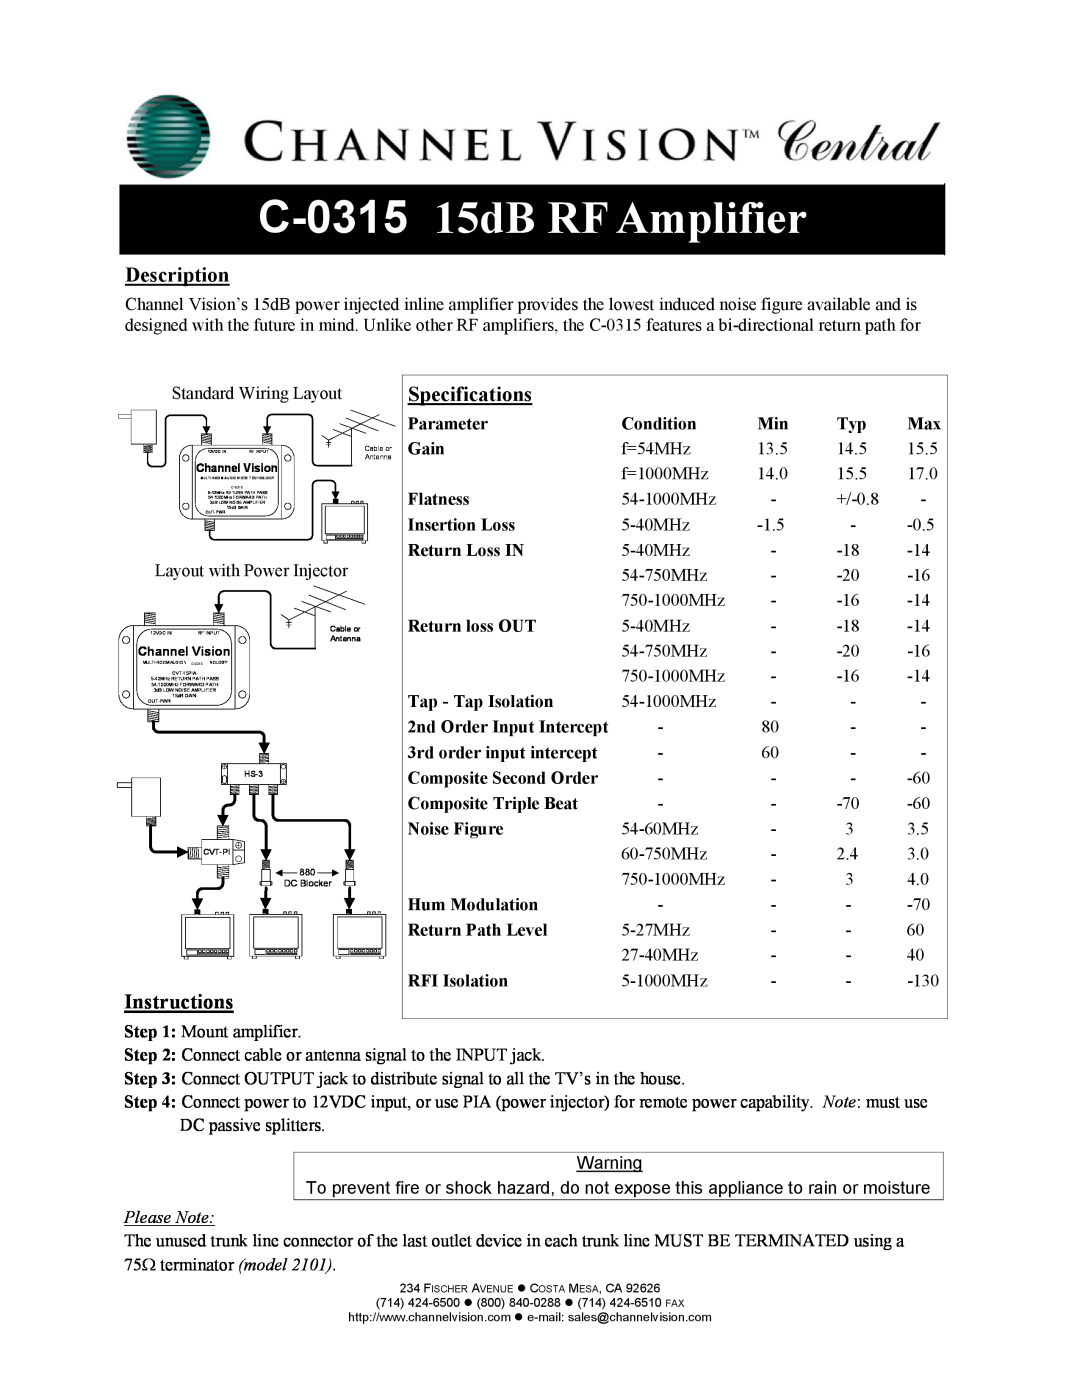 Channel Vision specifications C-0315 15dB RF Amplifier, Description, Instructions, Specifications, Please Note 